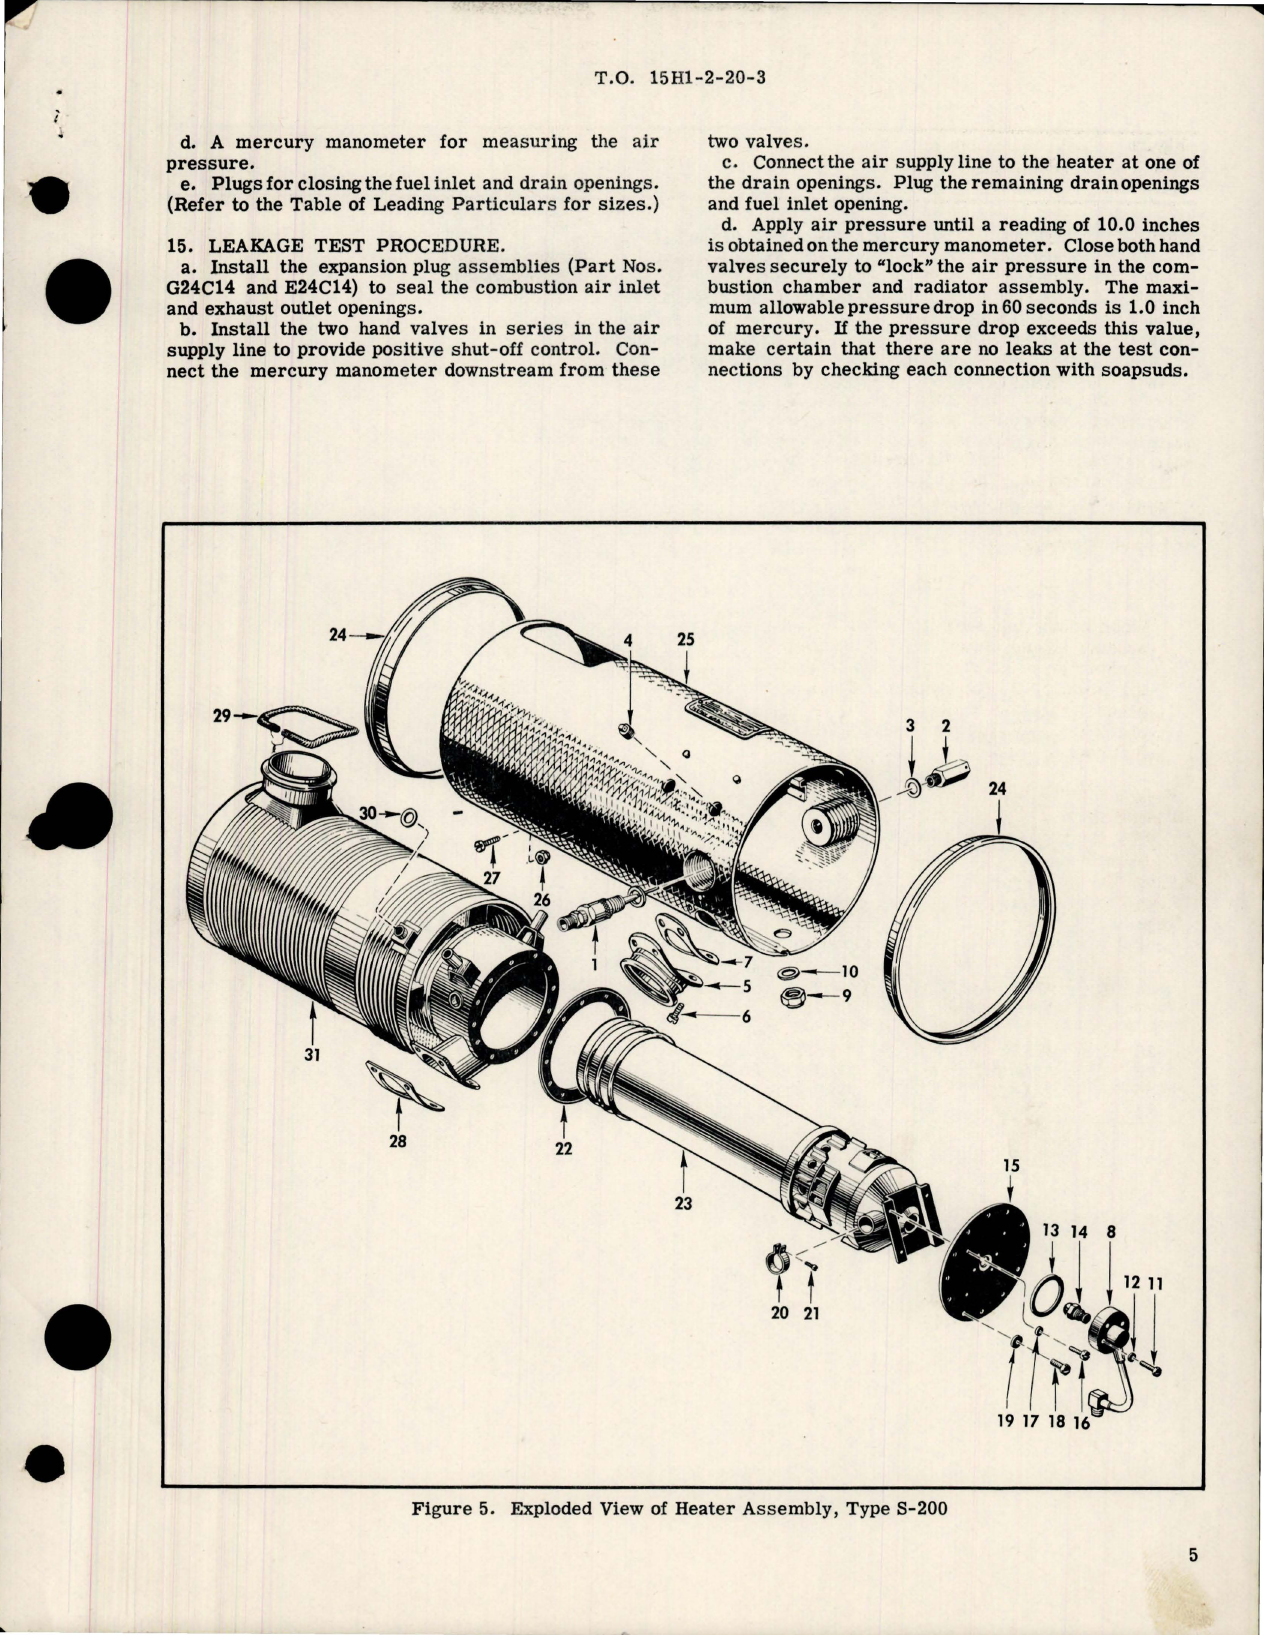 Sample page 5 from AirCorps Library document: Overhaul Instructions with Parts Breakdown for Aircraft Heater - Part 27C56 - Type S-200 